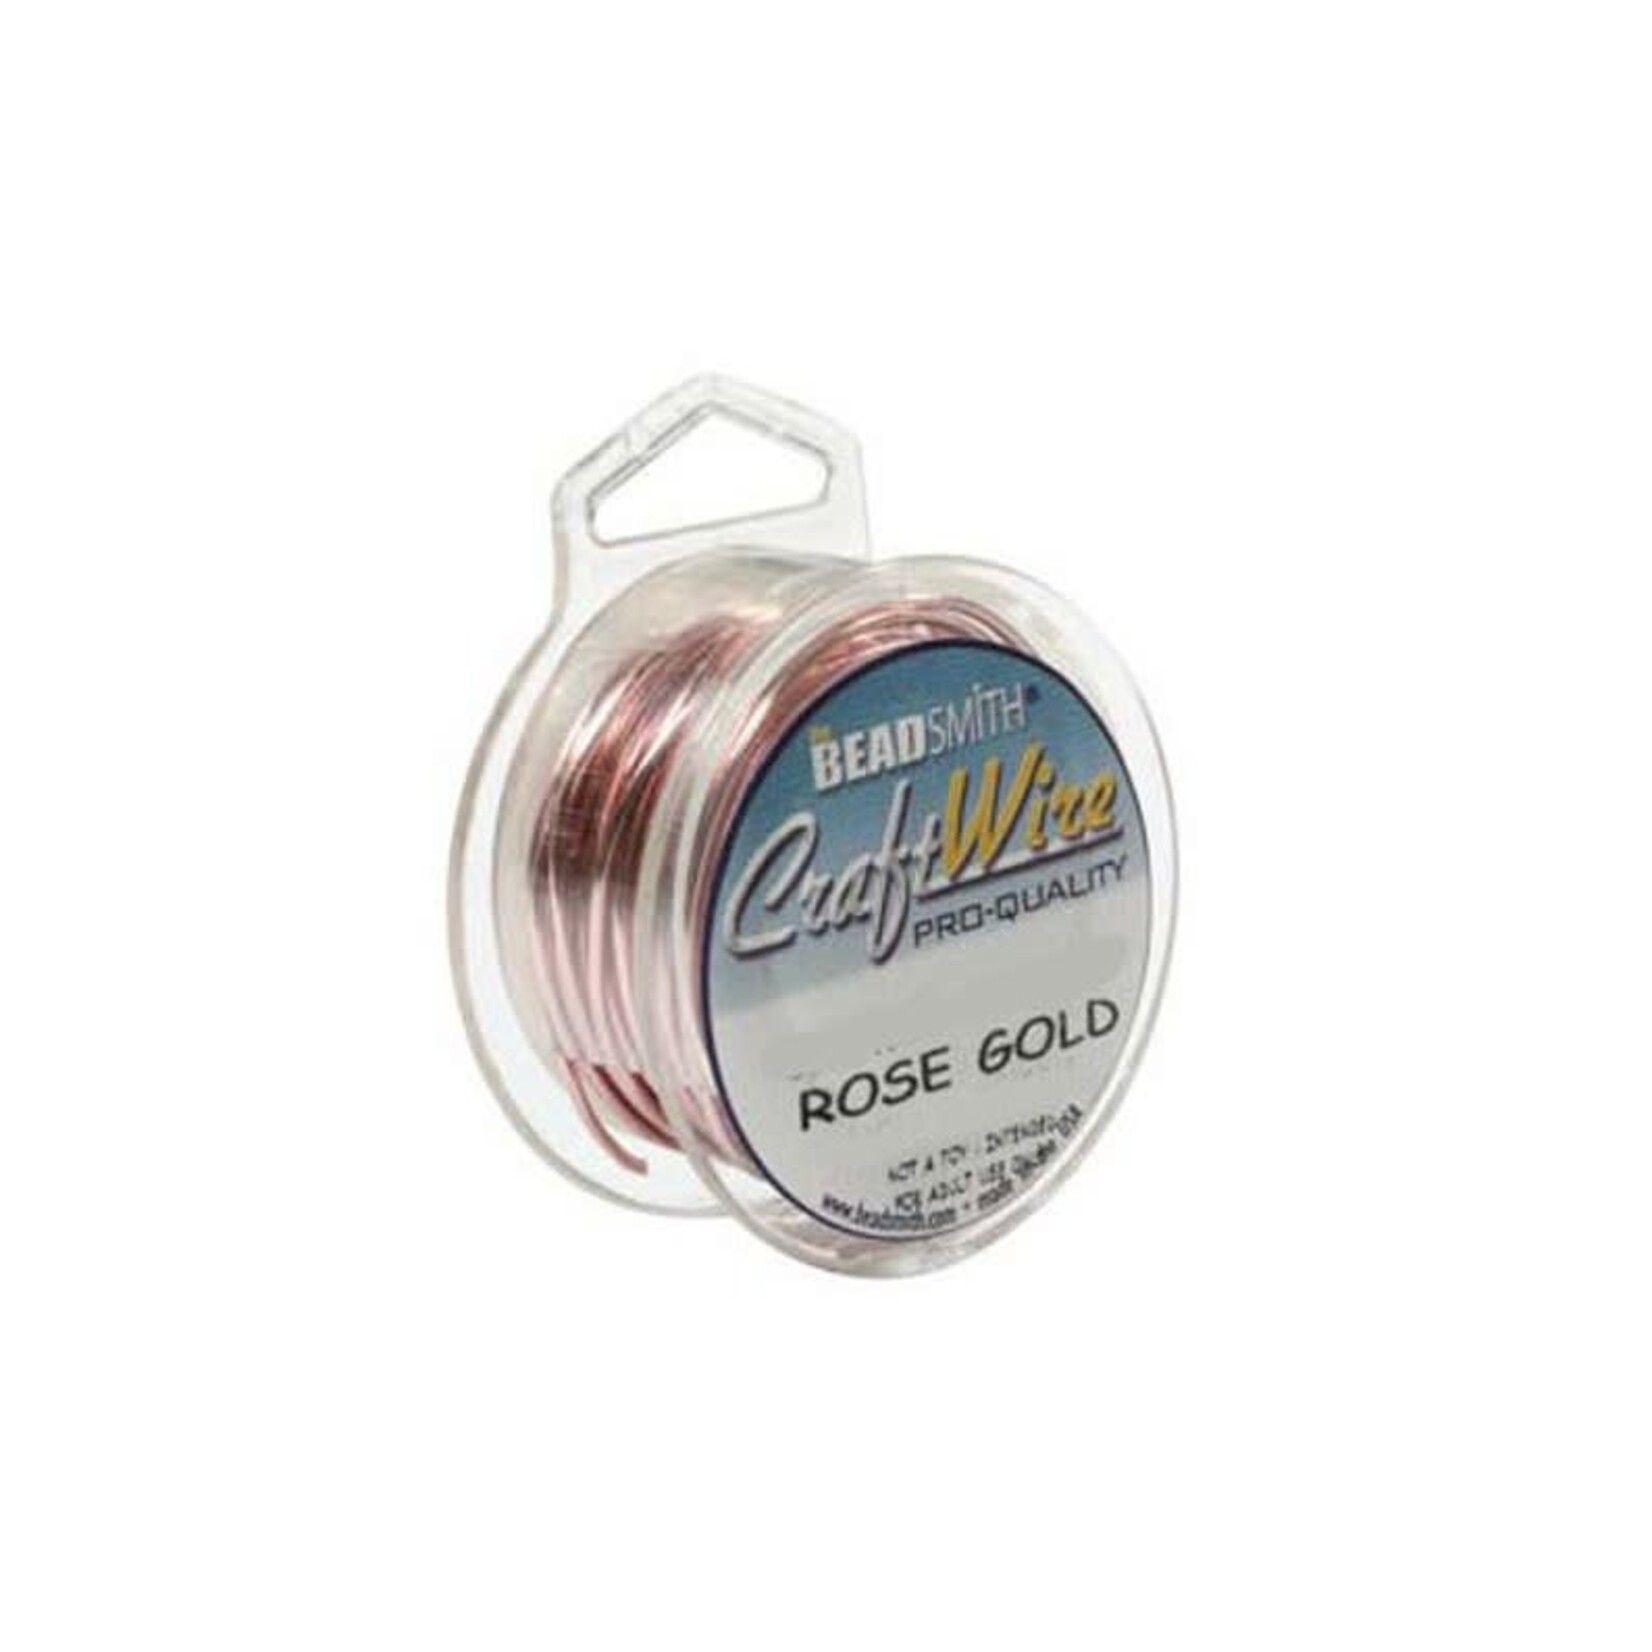 Artistic Wire Artistic Wire Rose Gold, 20 Gauge, 25 Foot Spool